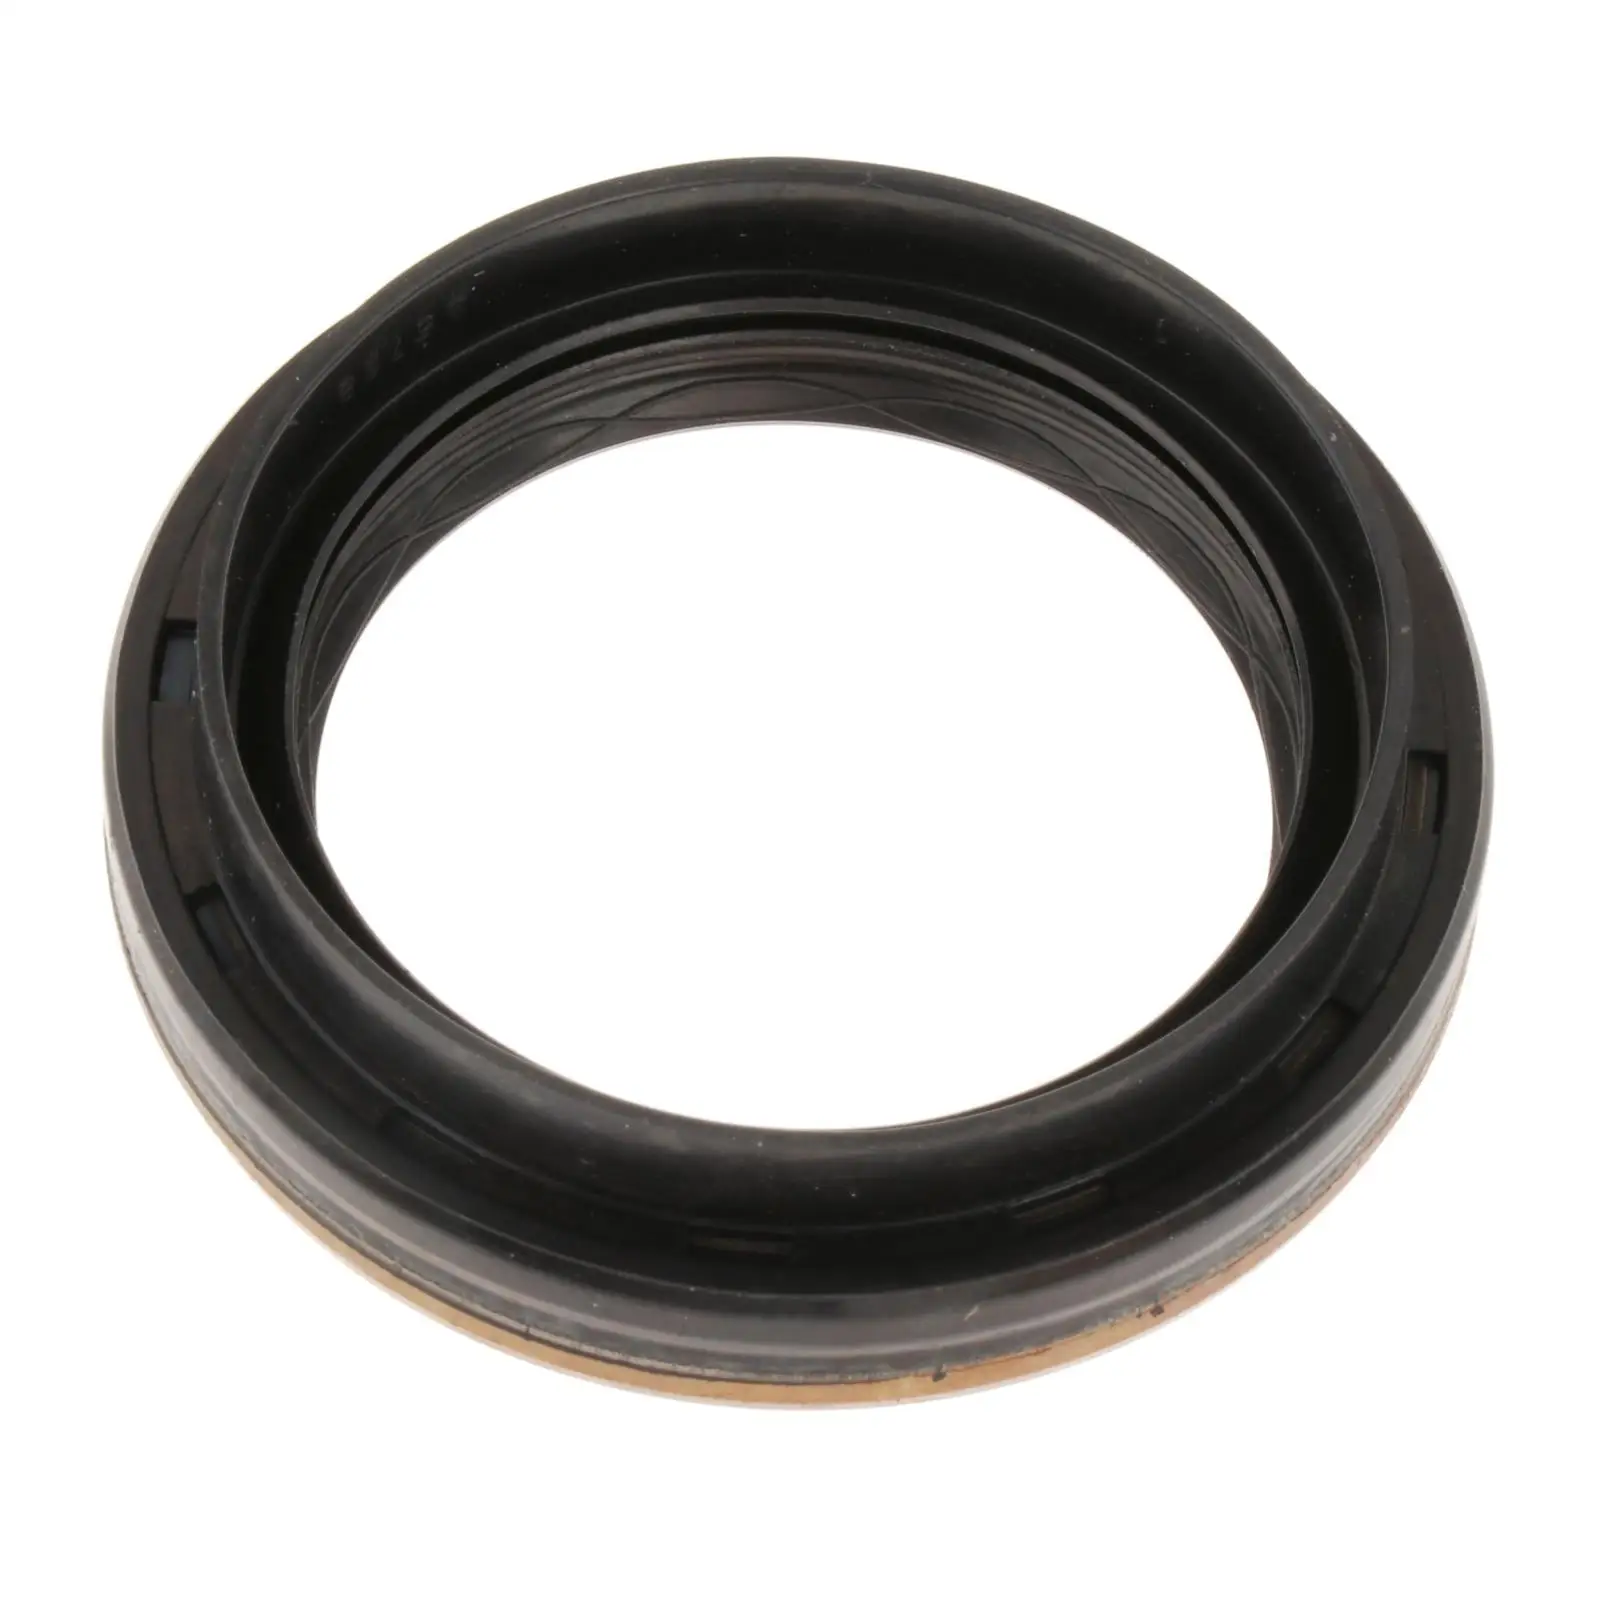 

Half Shaft Oil Seal Rubber High Reliability DPS6 6DCT250 for Focus